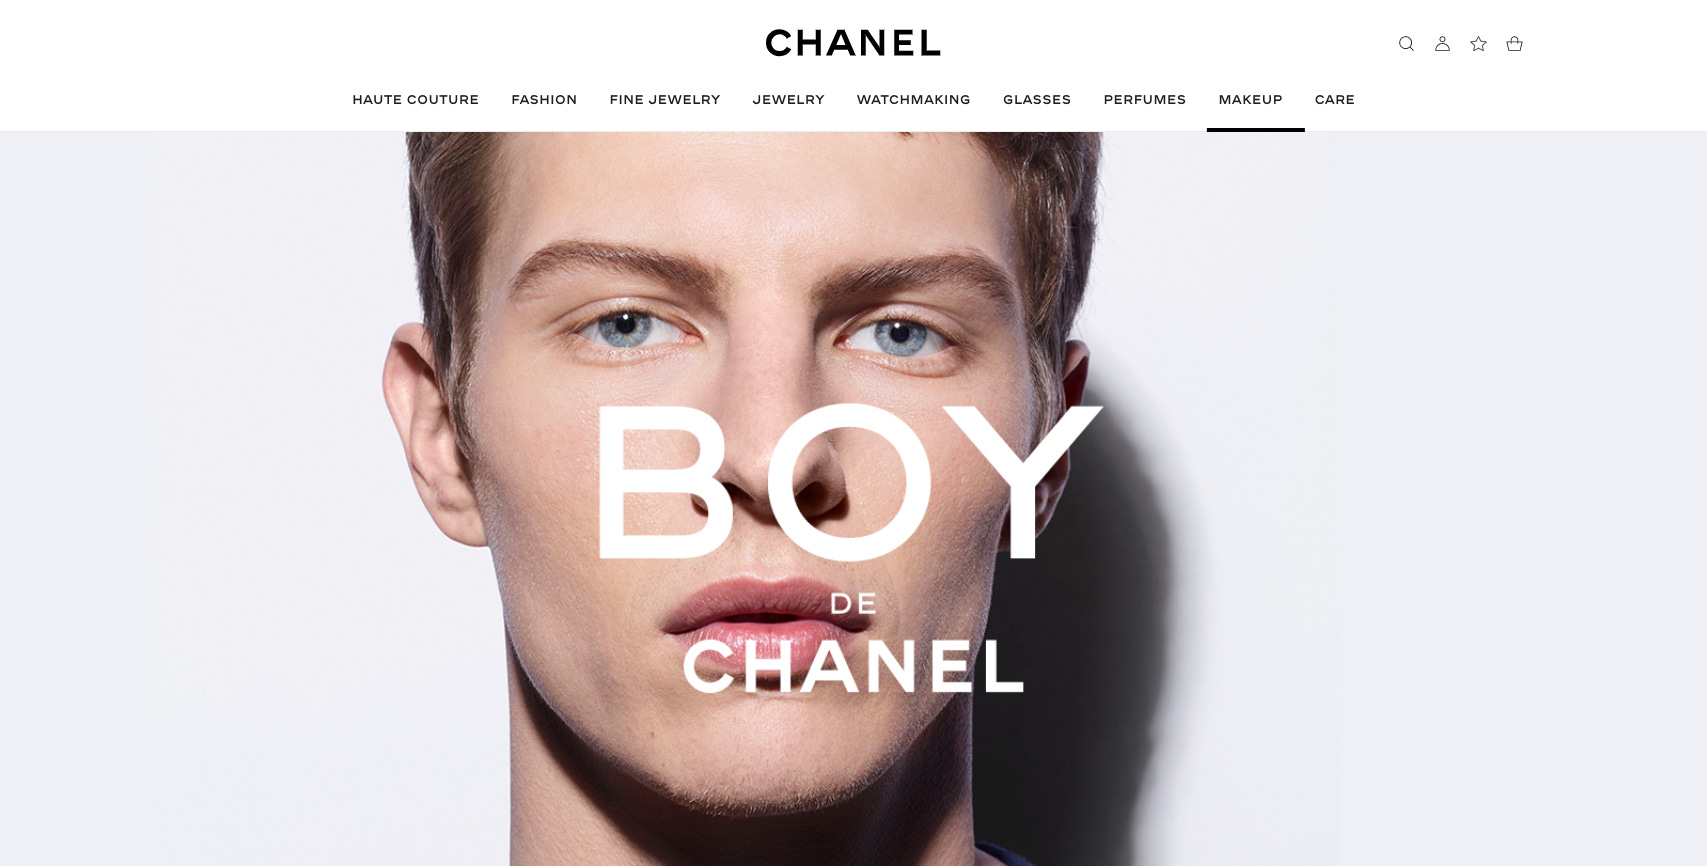 How to Define Your Beard with Boy de CHANEL - CHANEL Beauty Tutorials 